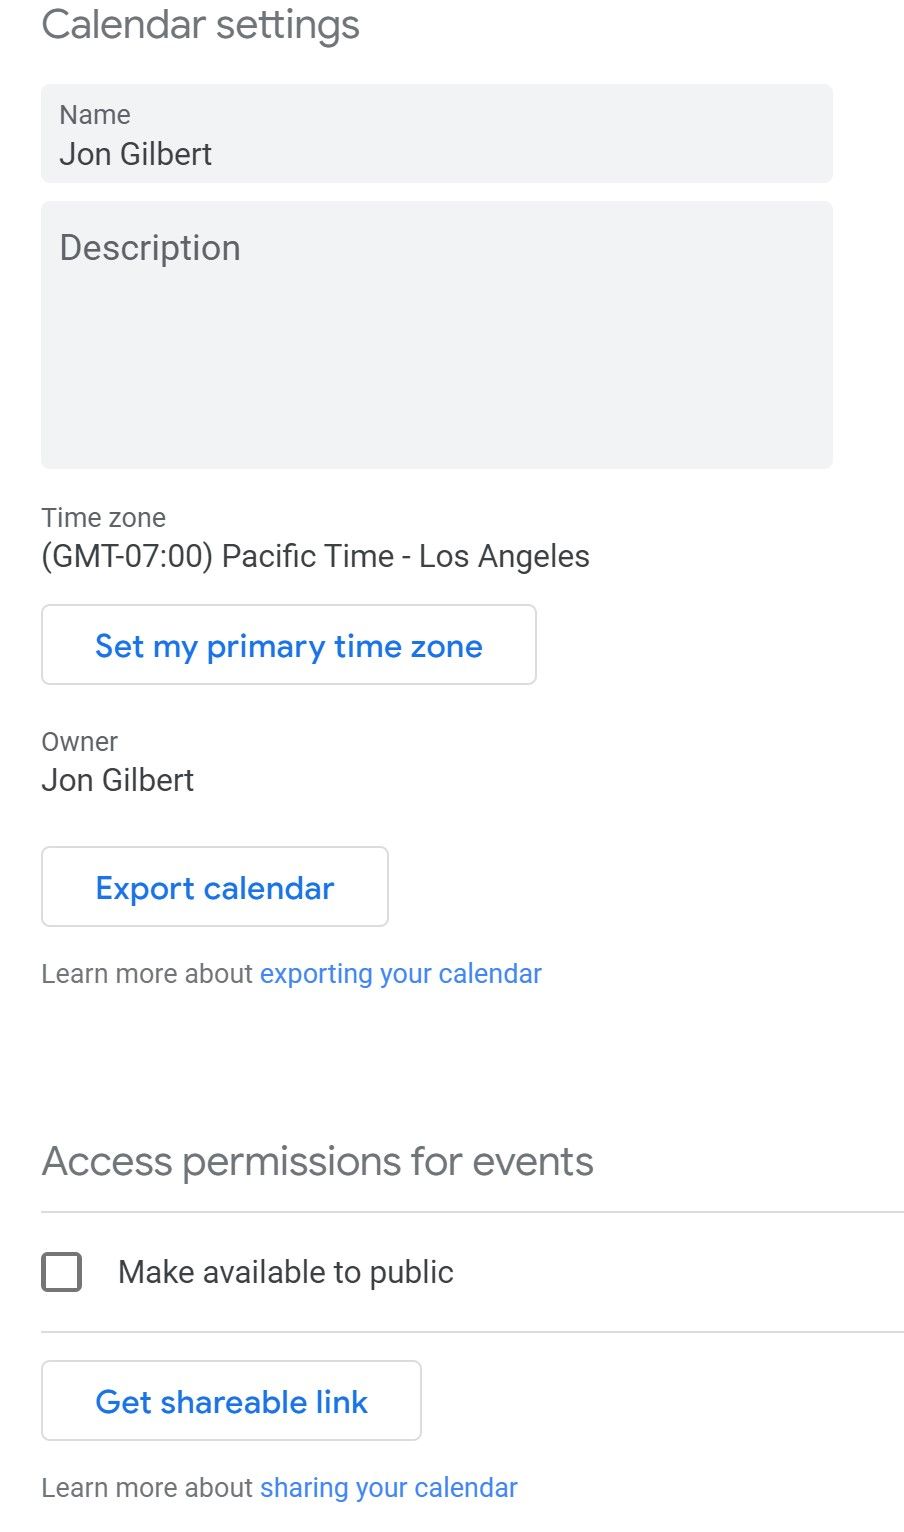 10 tips and tricks for easy scheduling in Google Calendar